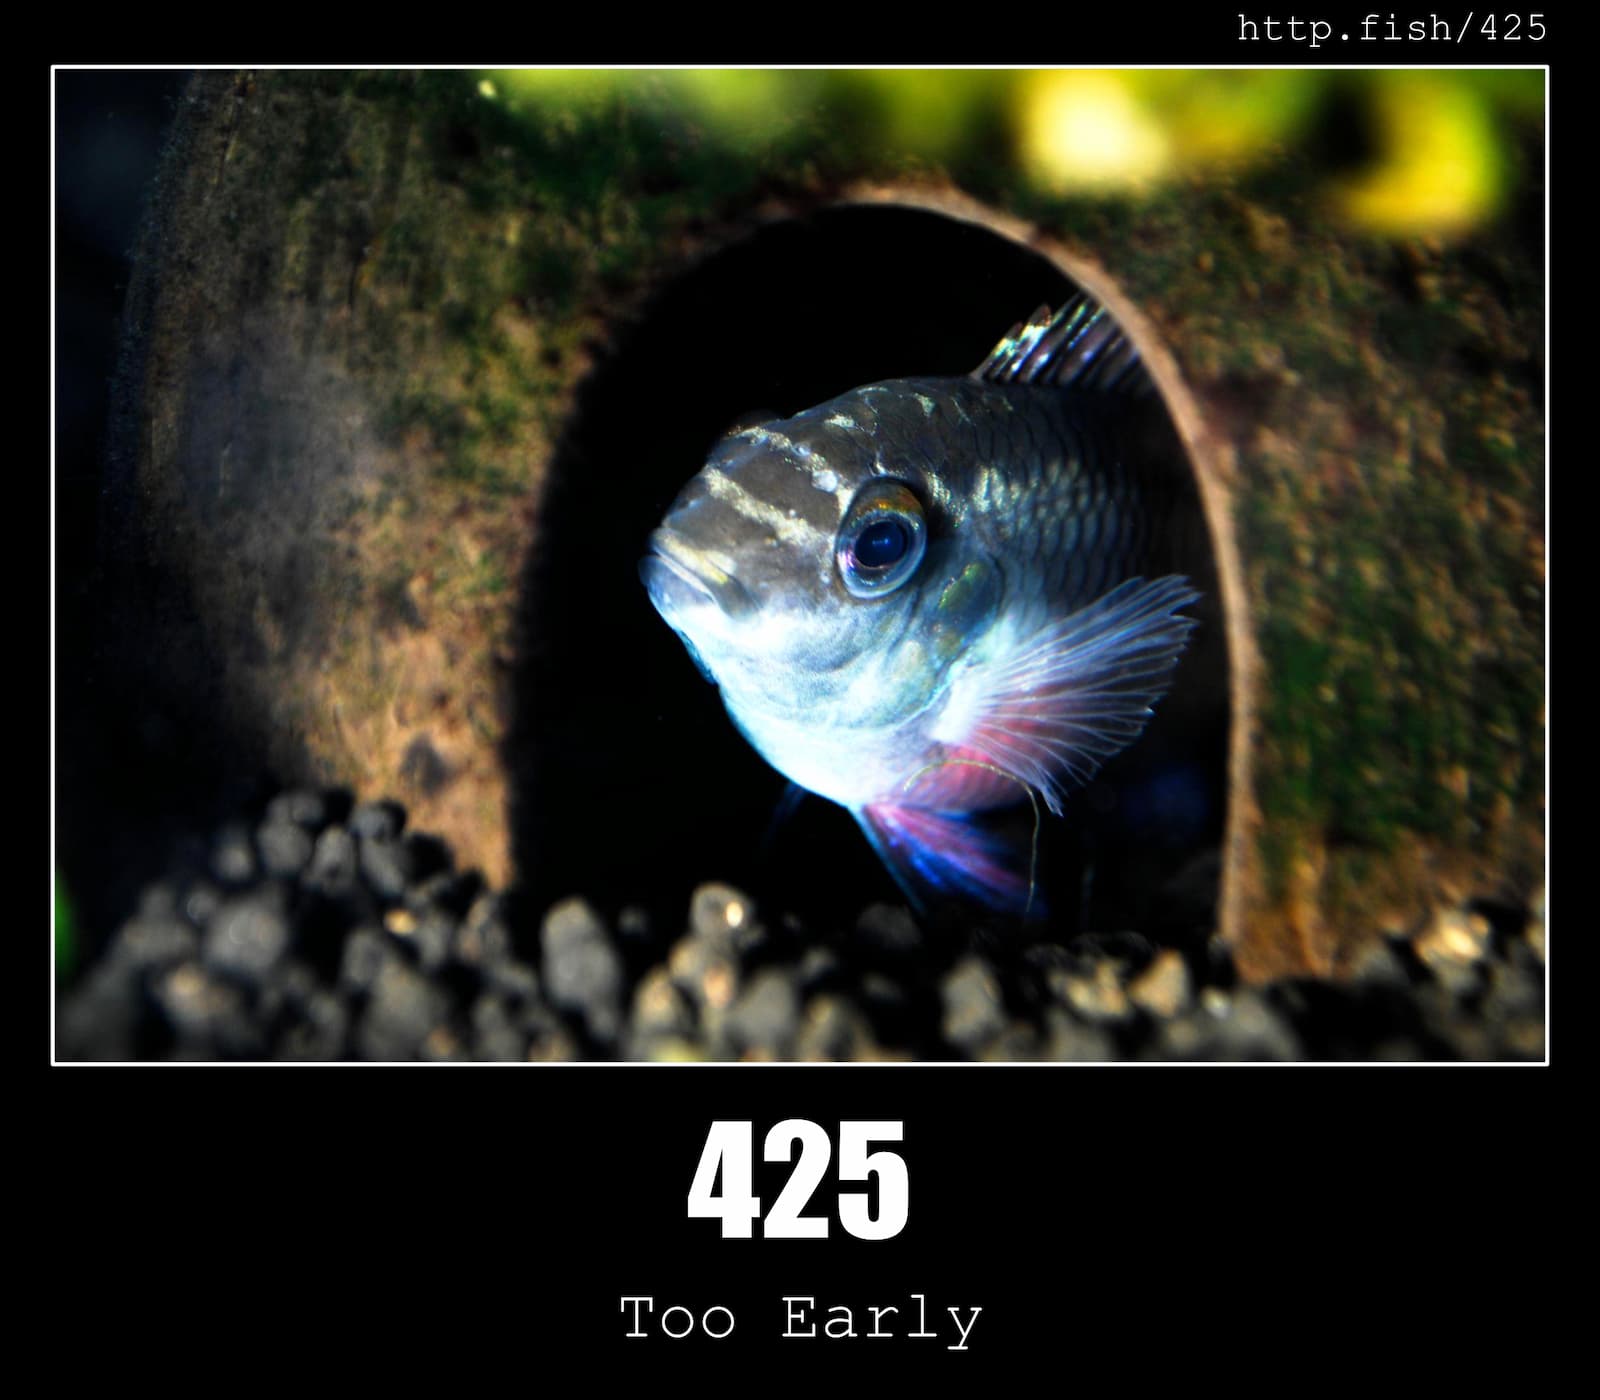 HTTP Status Code 425 Too Early & Fish